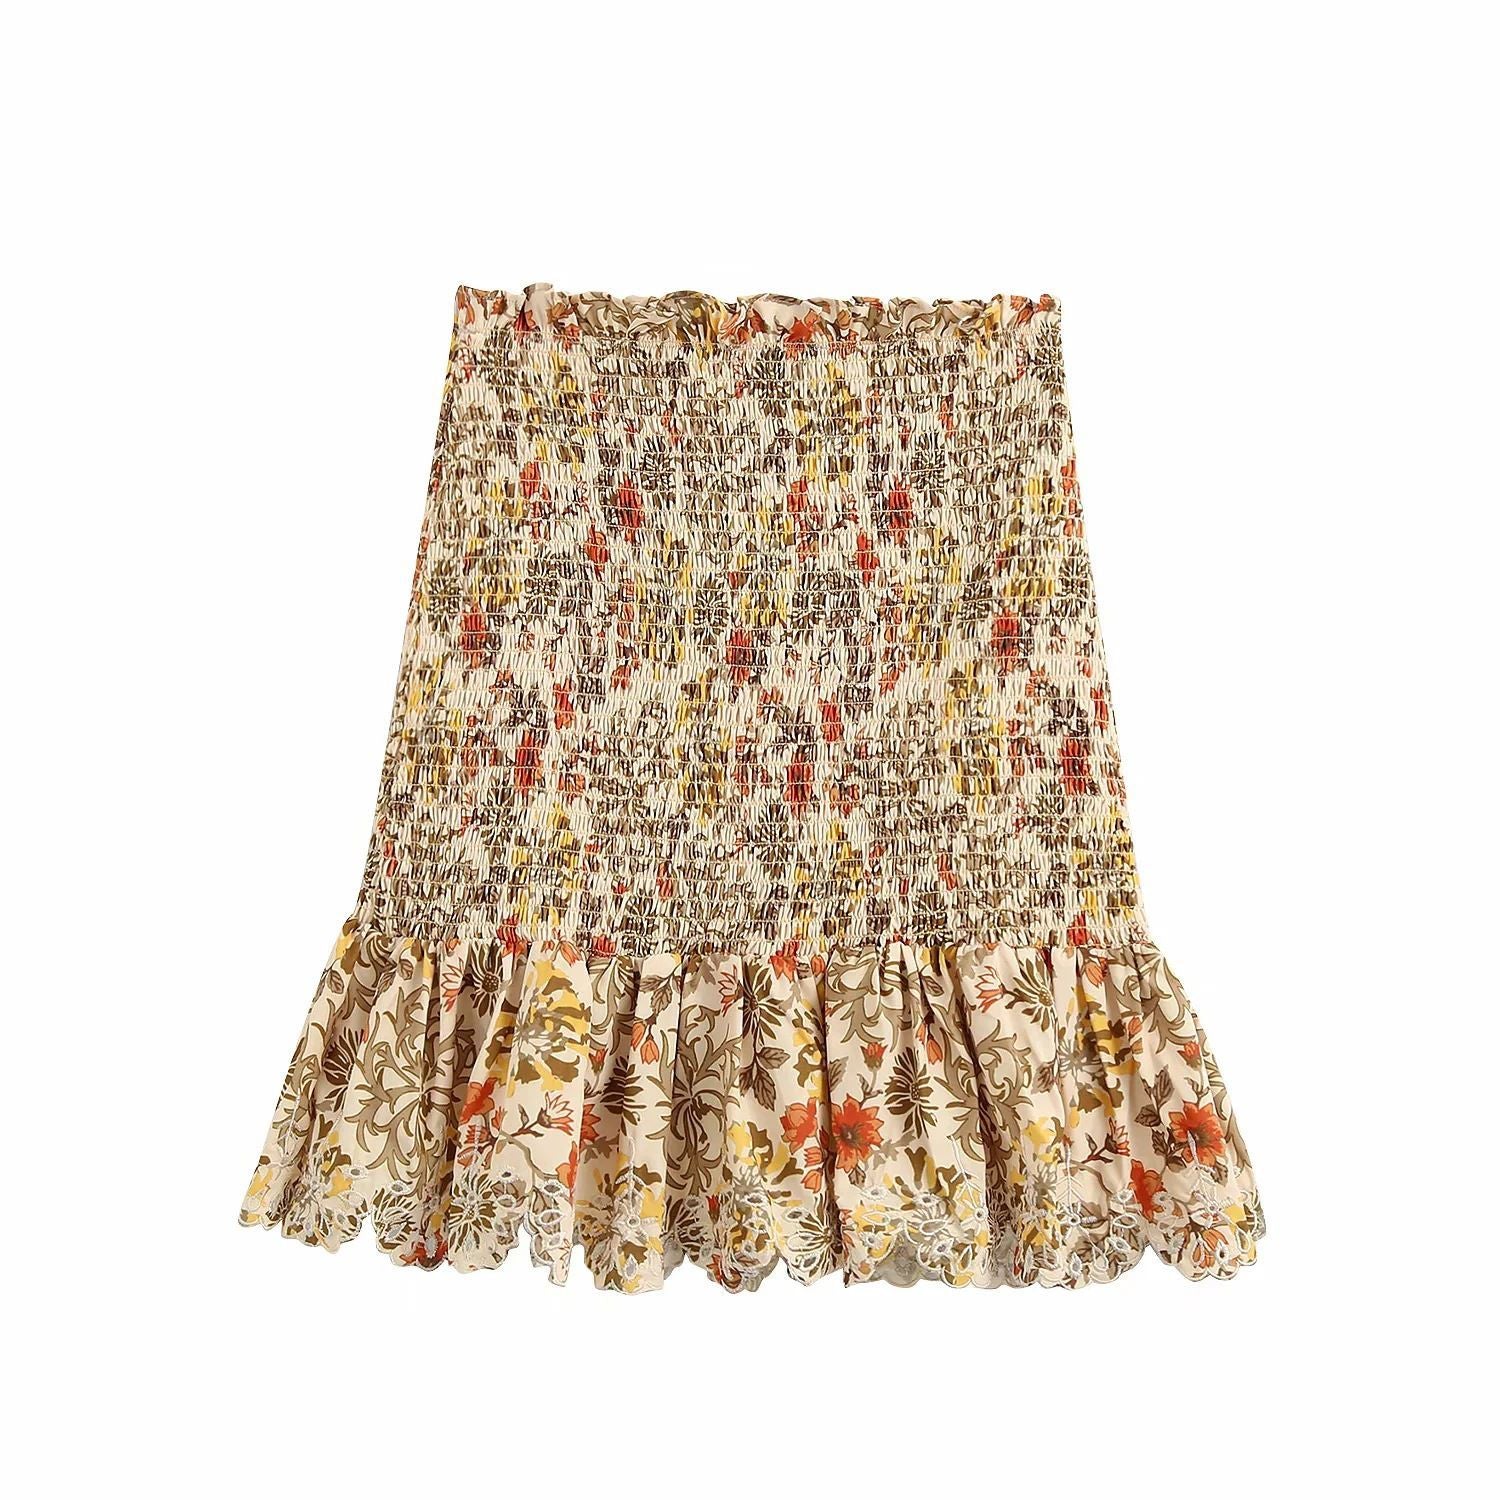 Retro Paisley Mixed Floral Smocked Ruffle Hem Mini Skirt In Multi Floral on sale - SOUISEE